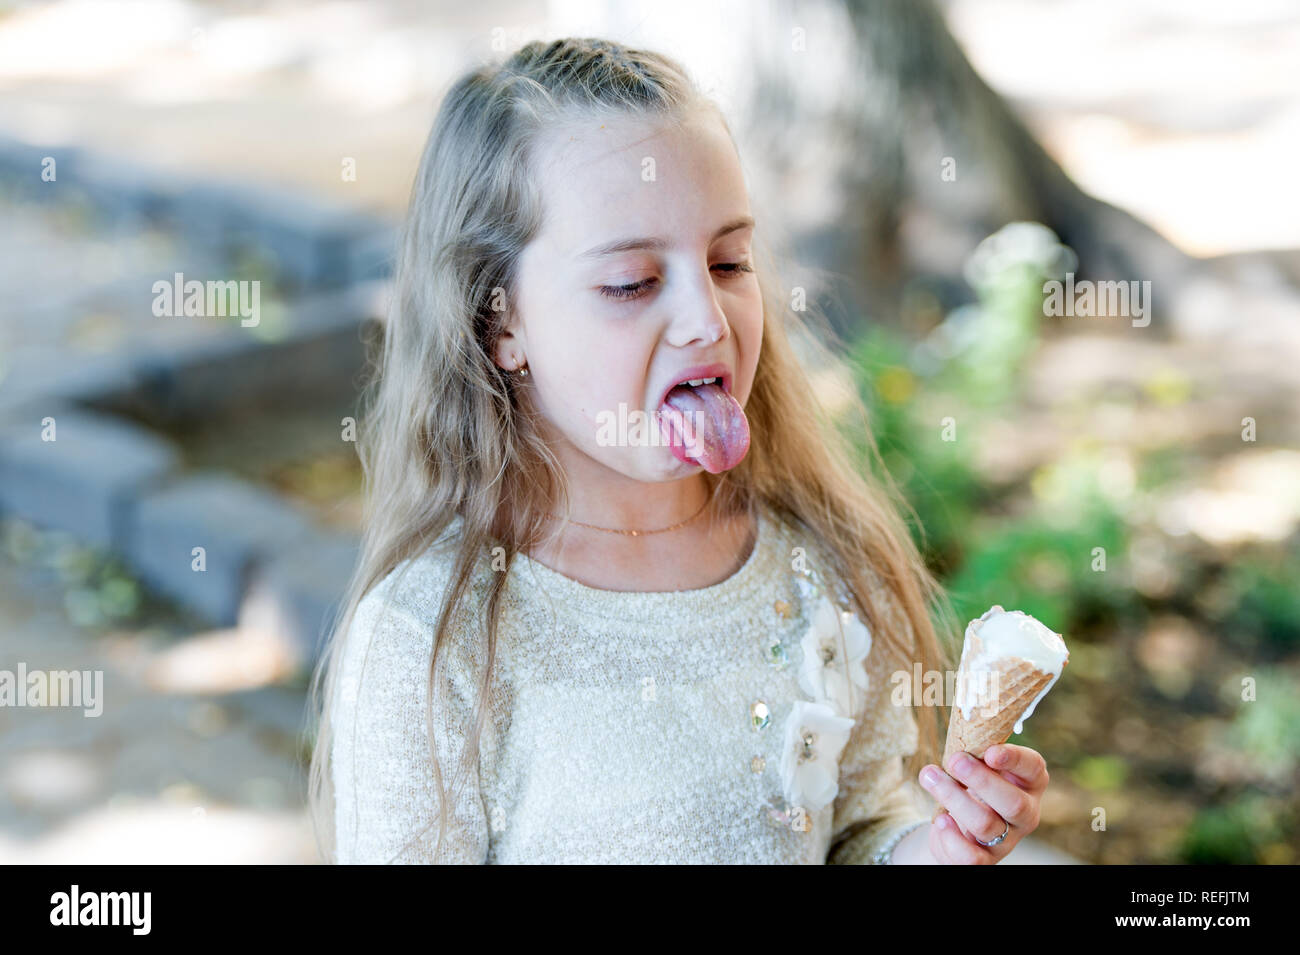 Kid girl with ice cream cone in hand. Summer treats concept. Sweet tooth girl child with white ice cream in waffle cone. Girl sweet tooth on disgusted face eats ice cream, light background. Stock Photo